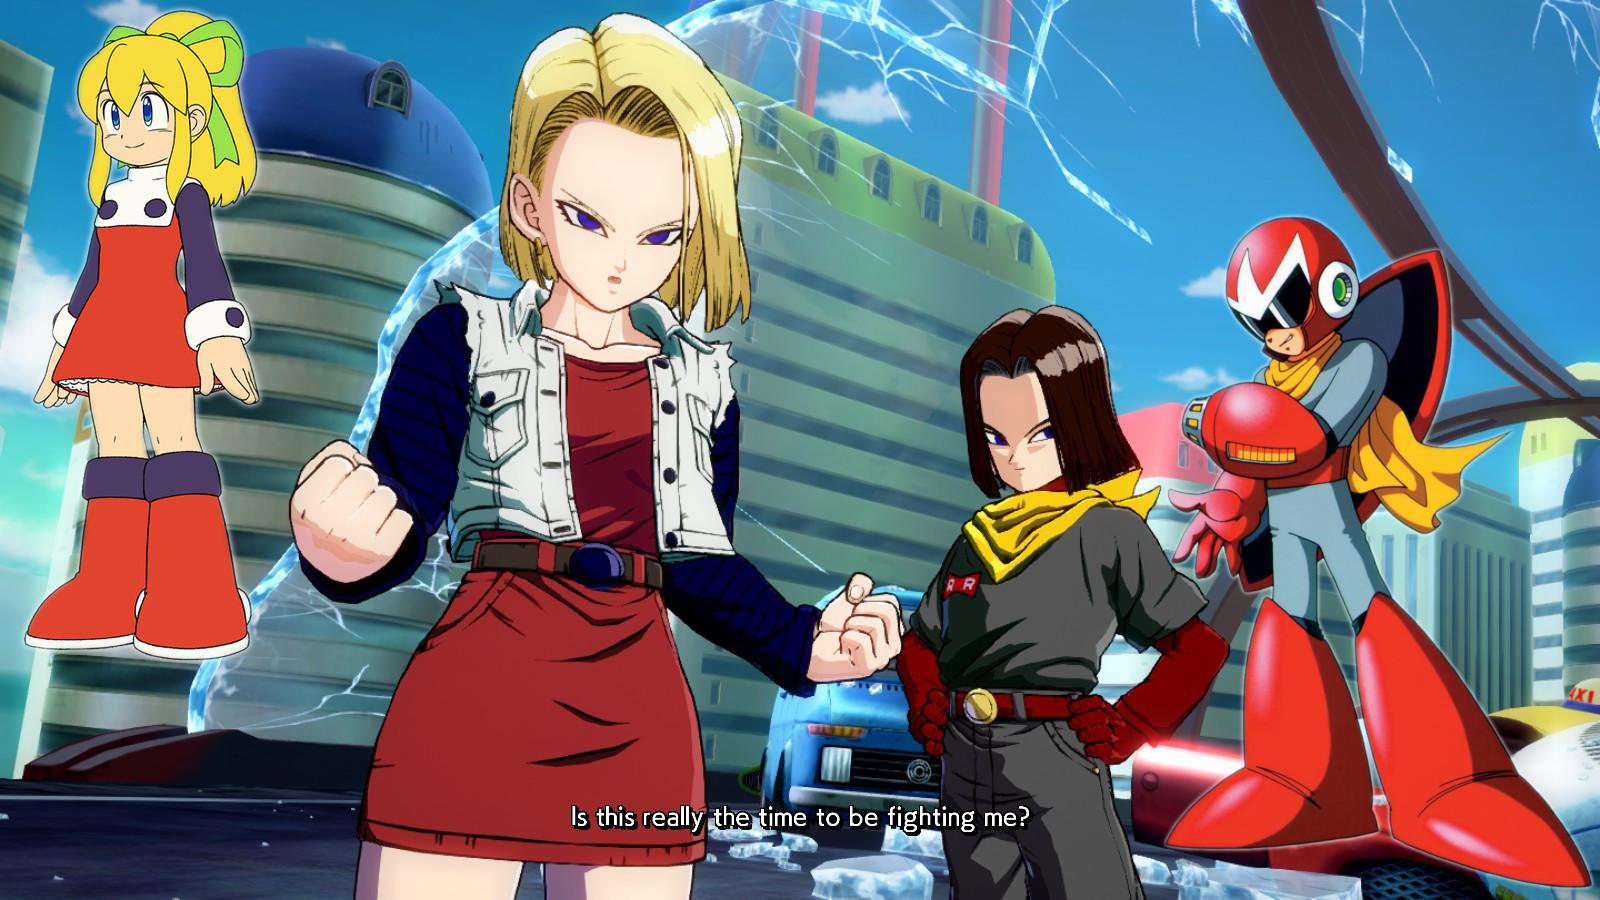 Roll and Proto Man over 18 and 17 Dragon Ball FighterZ